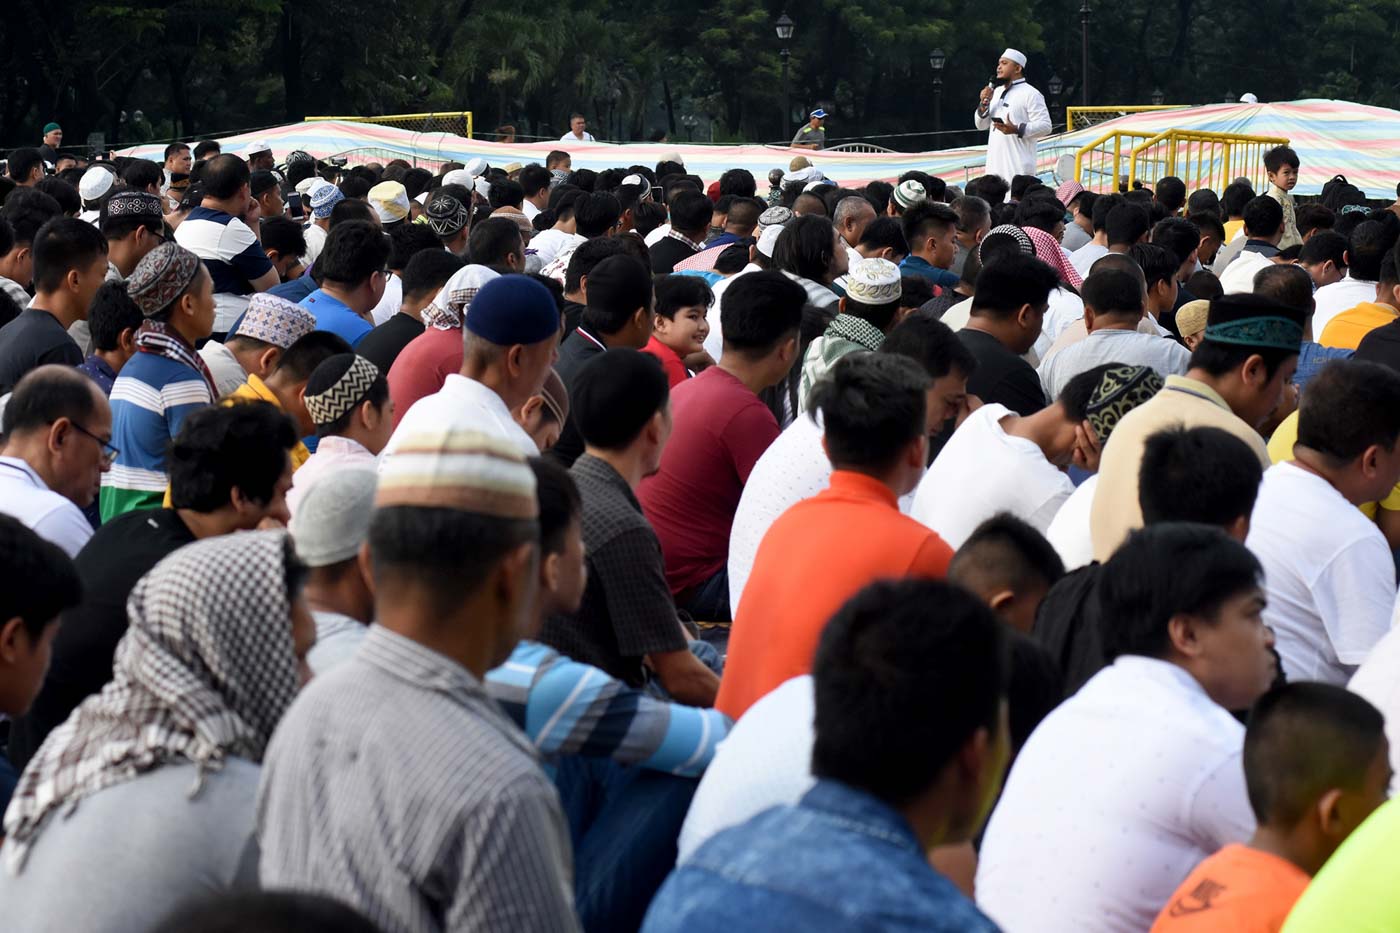 IMAM'S PREACHING. Ustadh Fahad Tambara, Islamic propagator of Amanah Islam Dawah Center, delivers his sermon during the celebration of the Eid'l Adha at the Quezon Memorial Circle on August 21, 2018. Photo by Angie de Silva/Rappler  